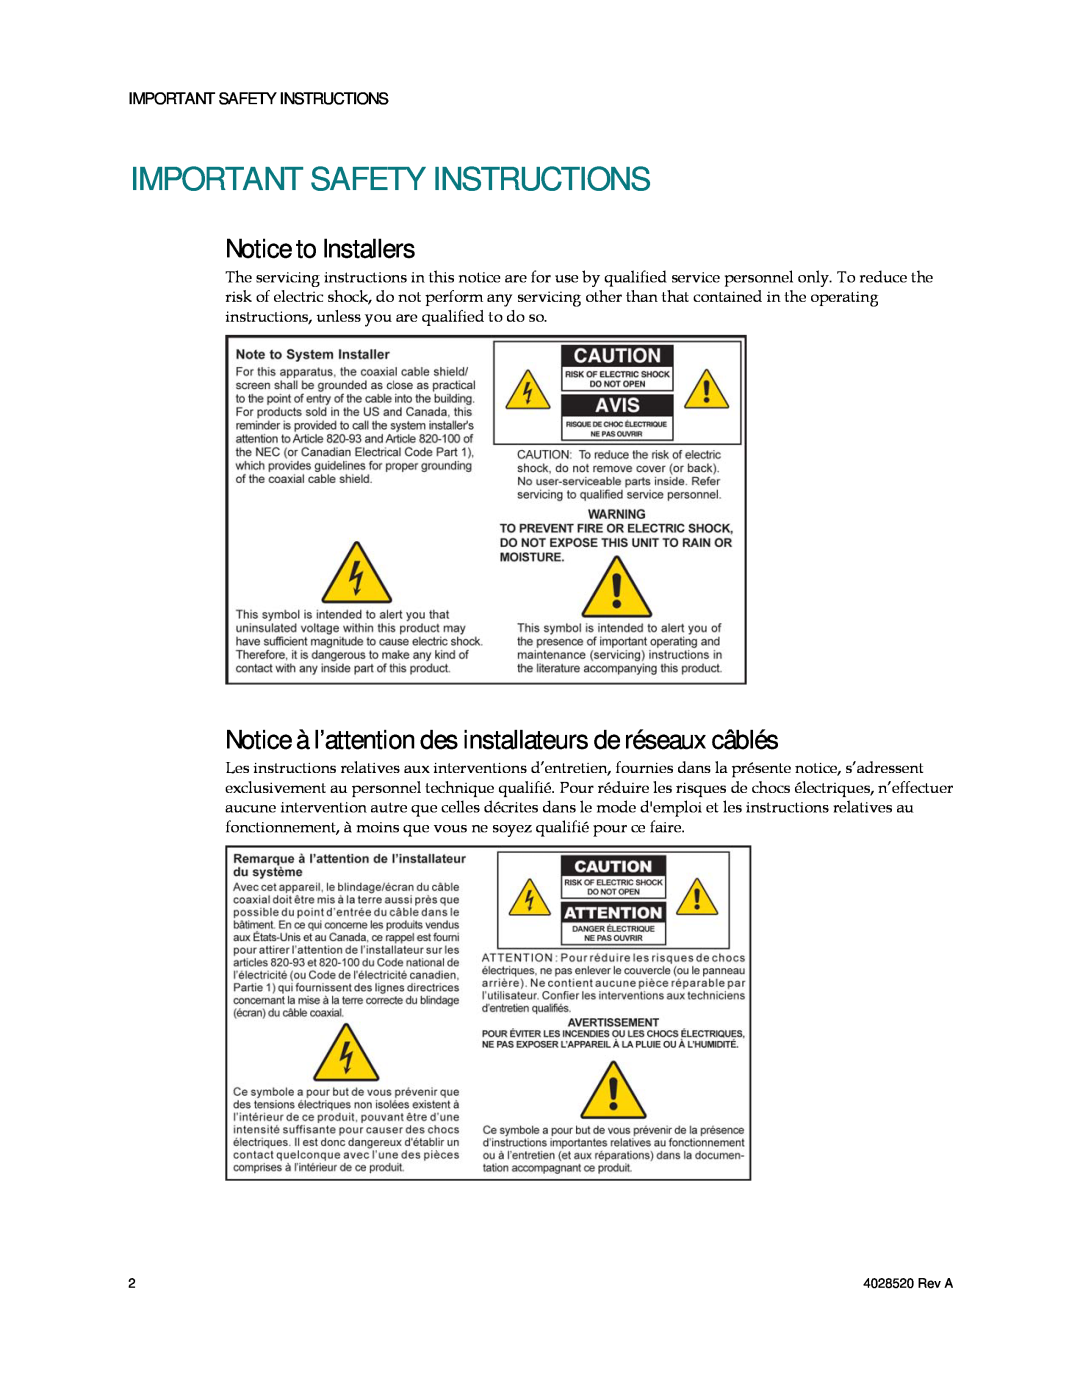 Cisco Systems DPQ2202 important safety instructions Important Safety Instructions, Notice to Installers 